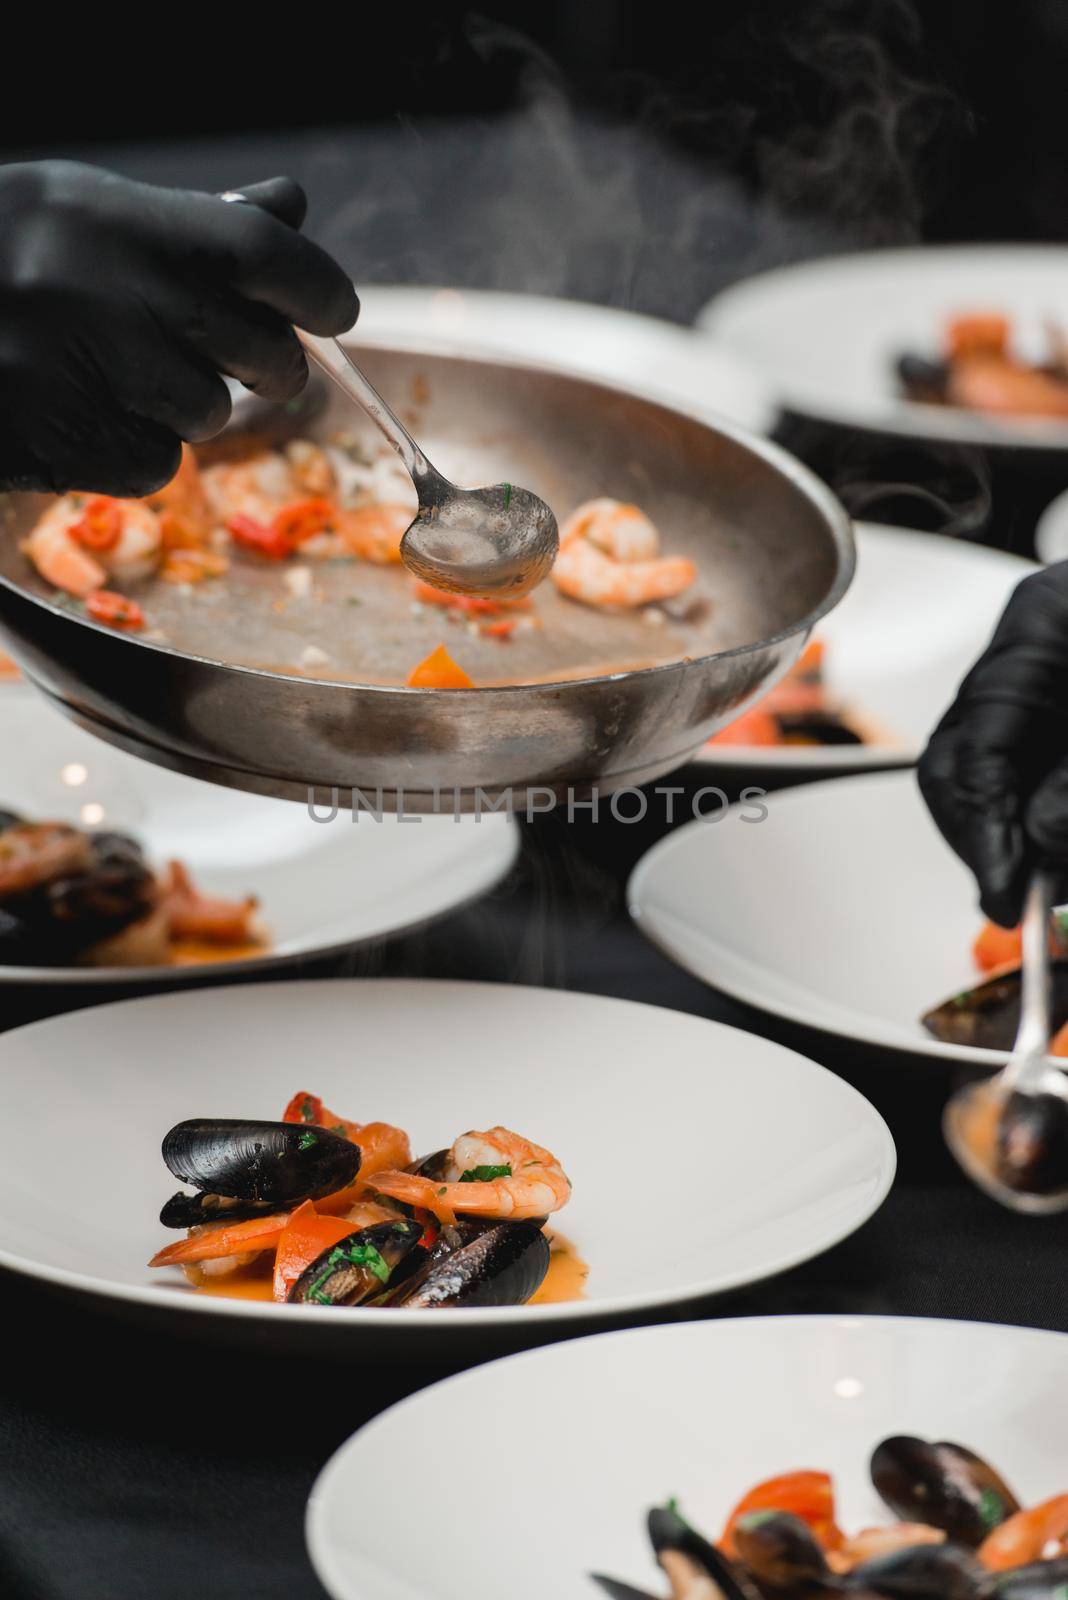 the chef prepares a seafood dish. frying pan with seafood and lemon and basil. shrimp squid and mussels fried in white. by Ashtray25